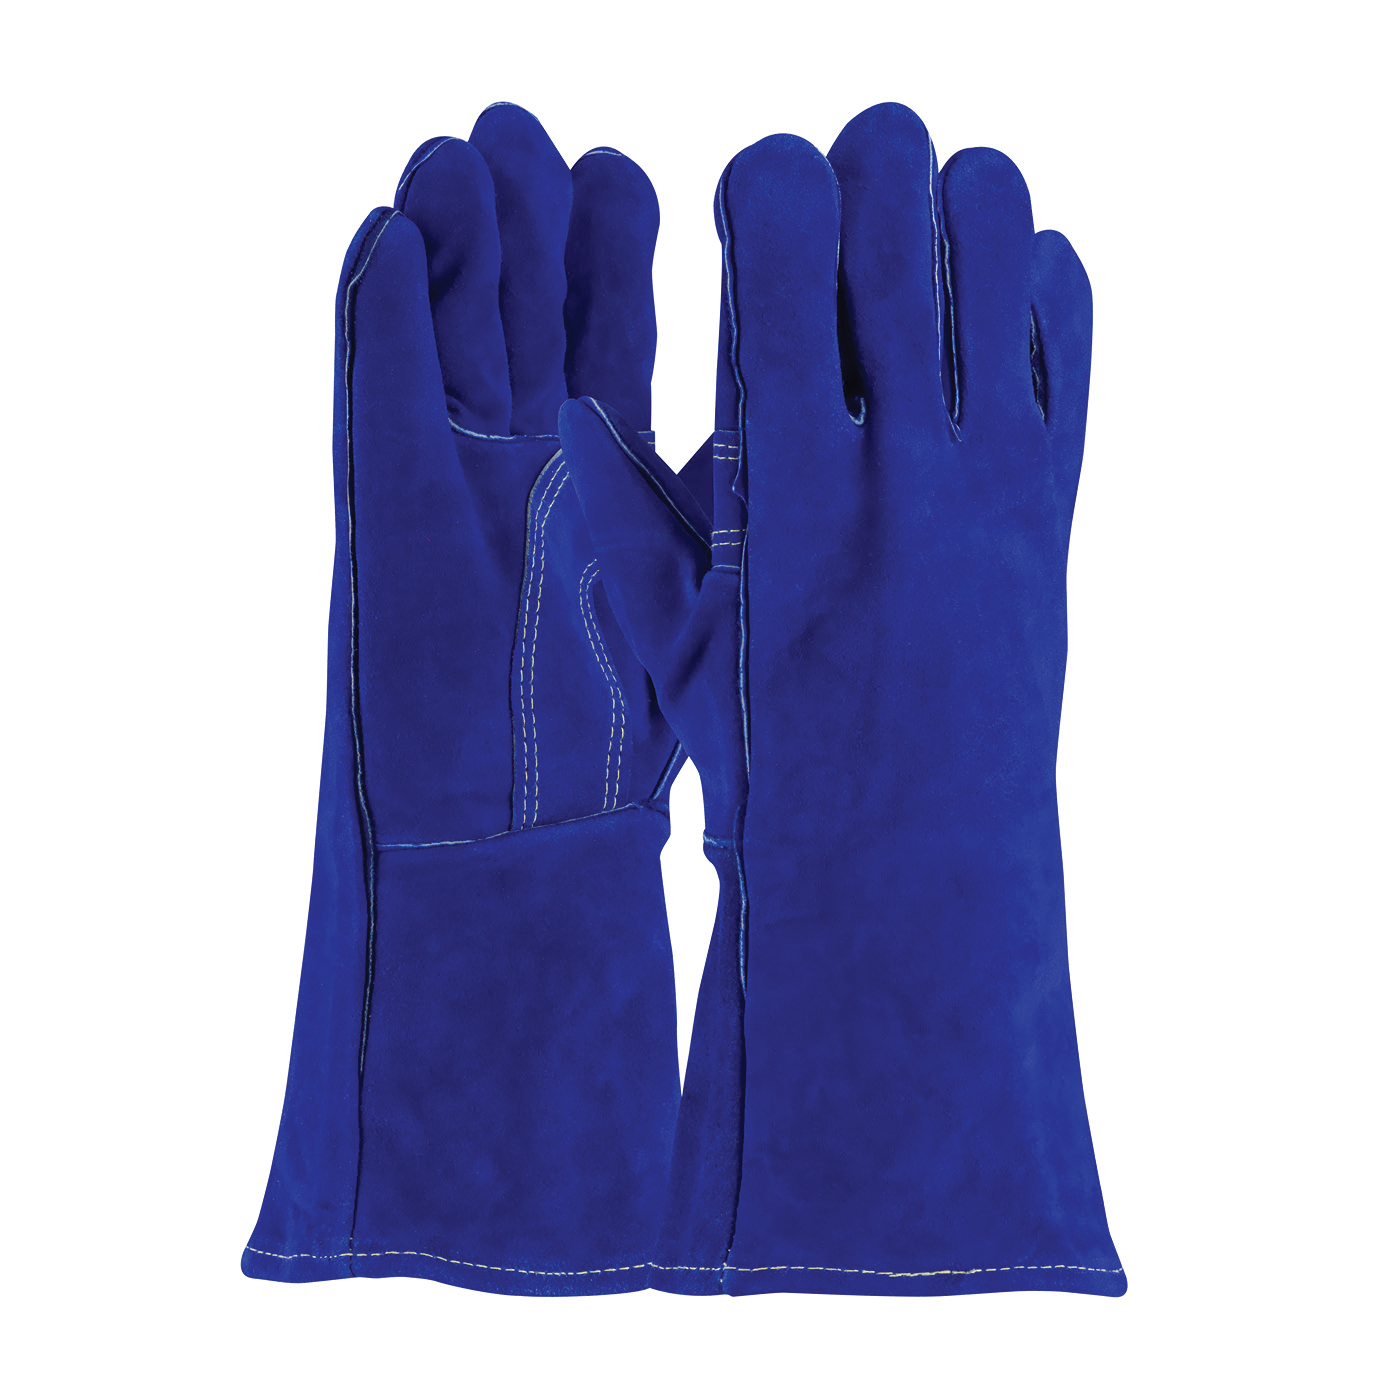 PIP® Blue Bison™ 73-7007RHO Welding Gloves, L, Split Cowhide Leather, Blue, Cotton Lining, Gauntlet Cuff, 13-1/2 in L, 1.2 mm THK Glove Material